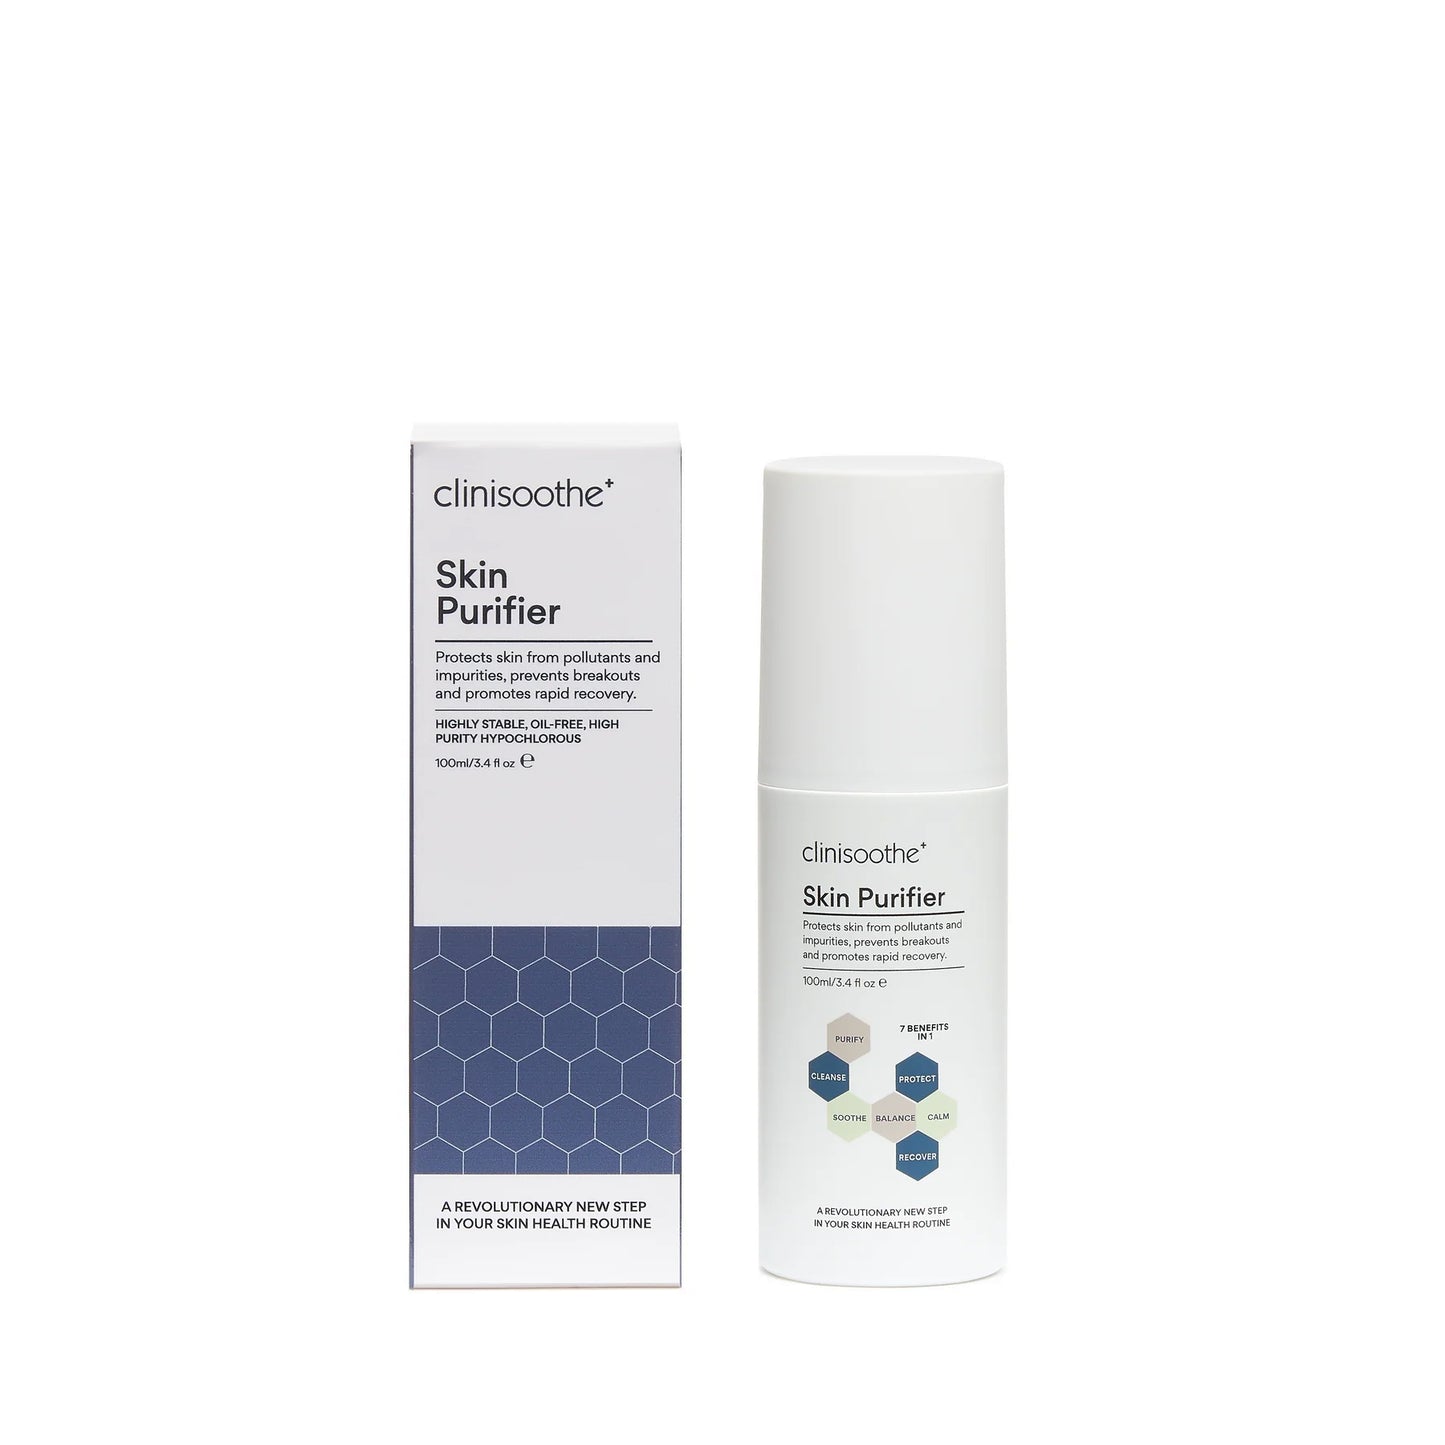 Clinisoothe+ Skin Purifier 100ml